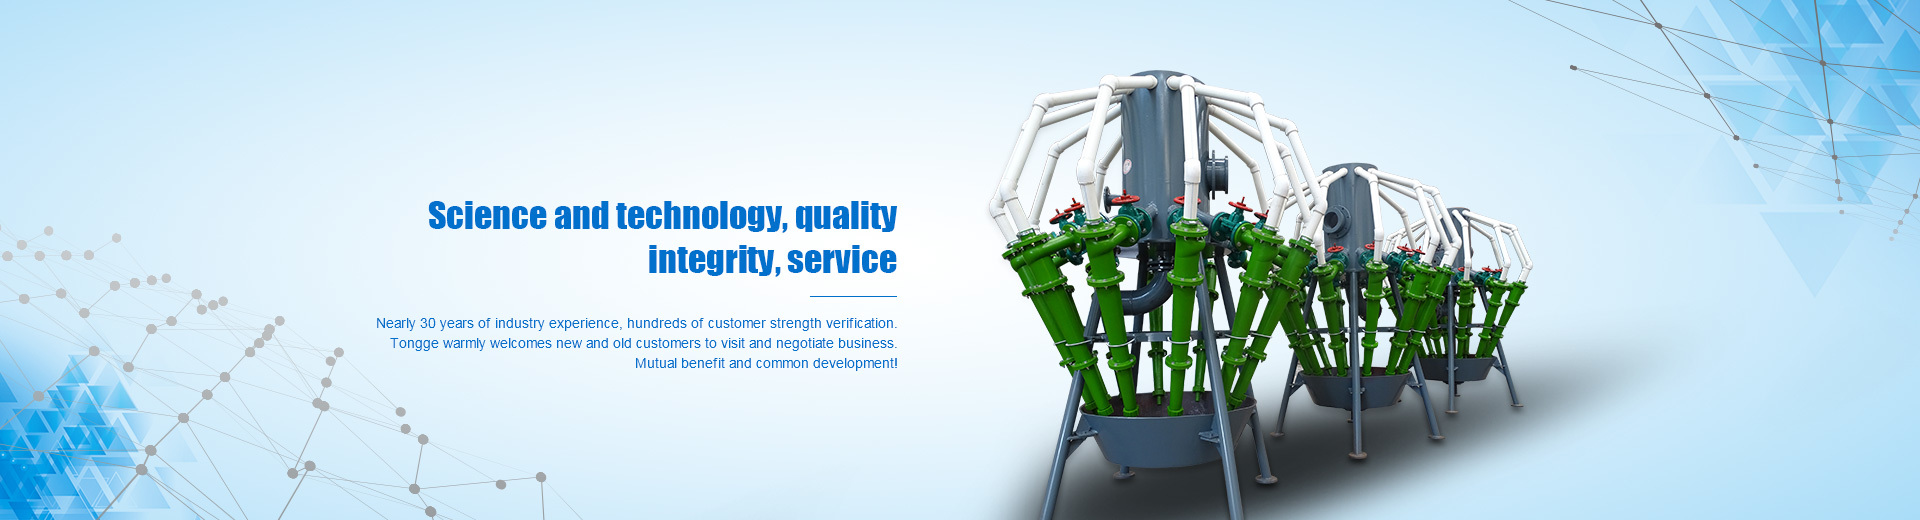 Technology Quality Integrity Service